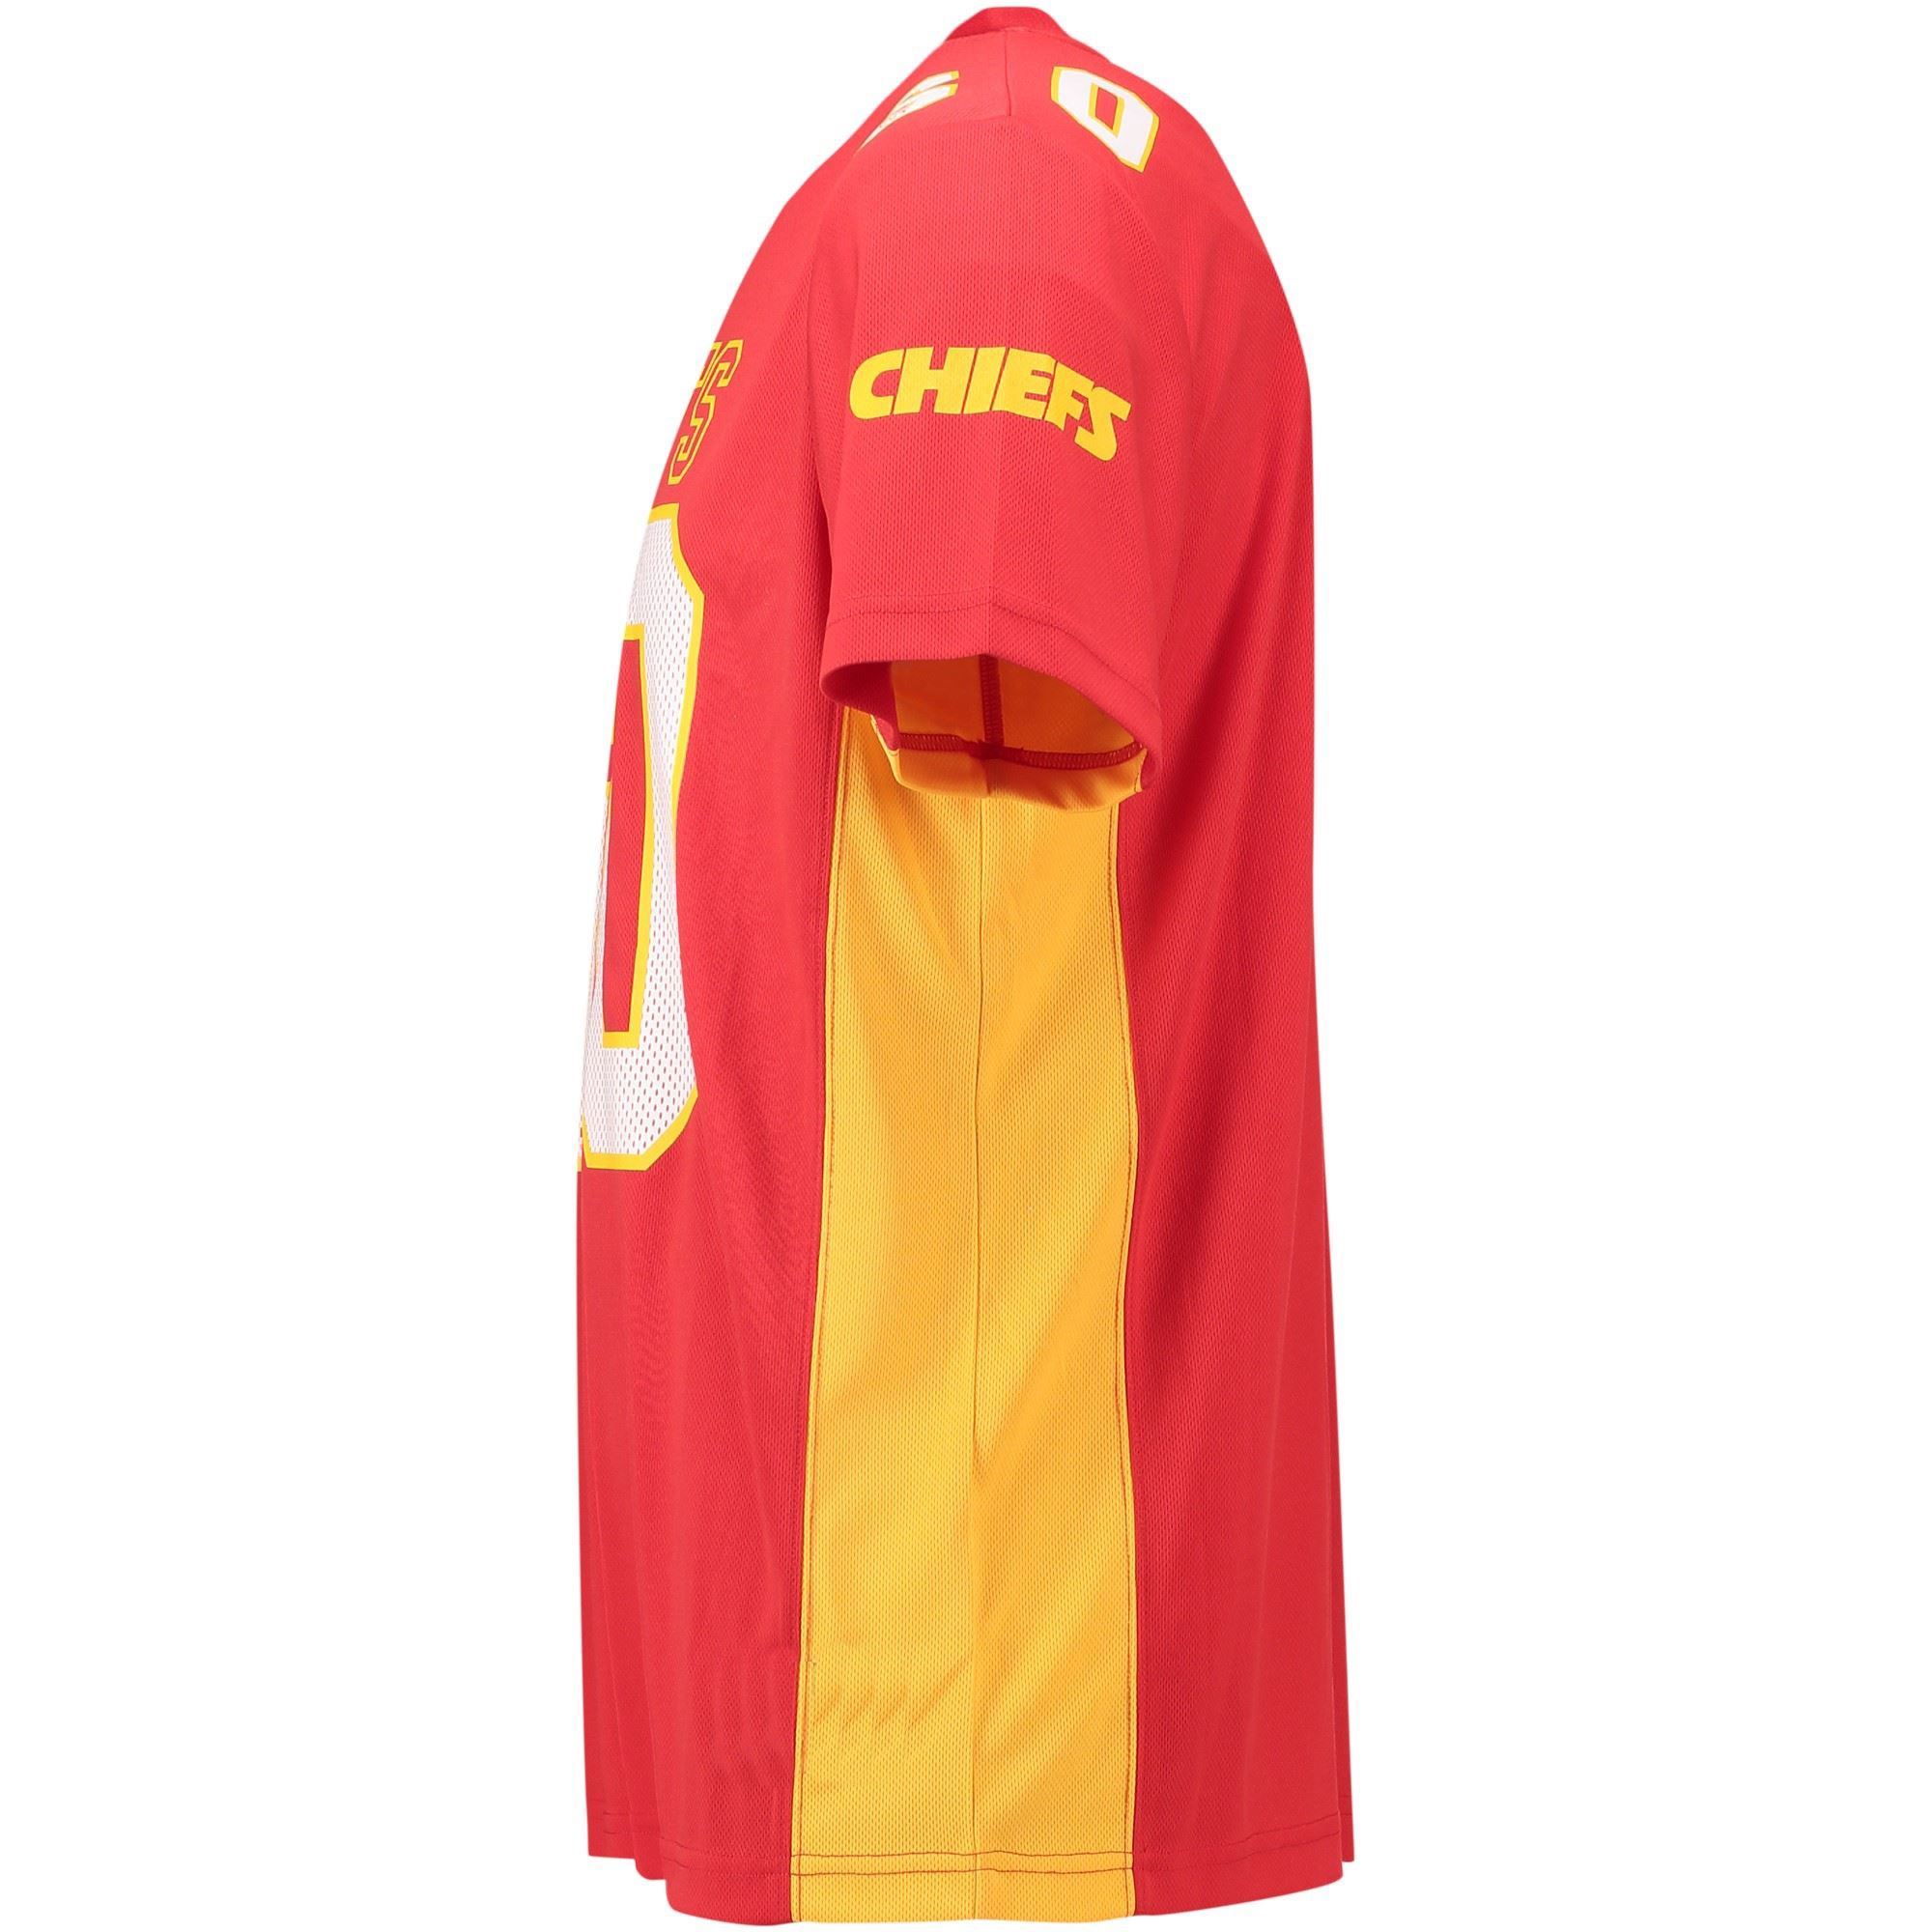 Kansas City Chiefs Red NFL Poly Mesh Supporters Jersey Fanatics